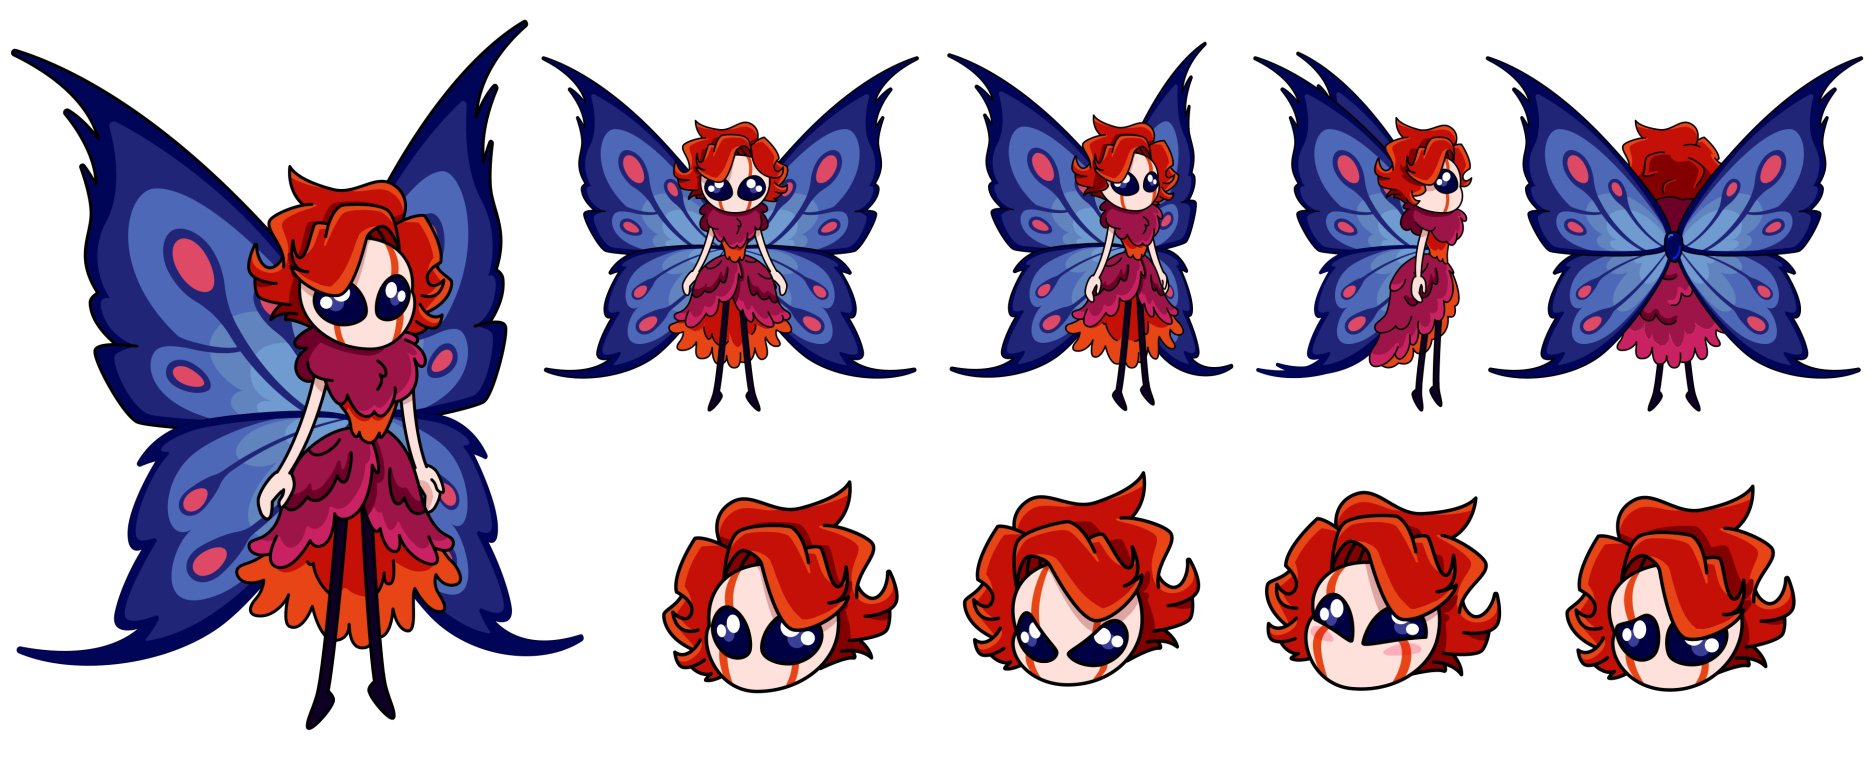 Character sheet for insect-fairy creature